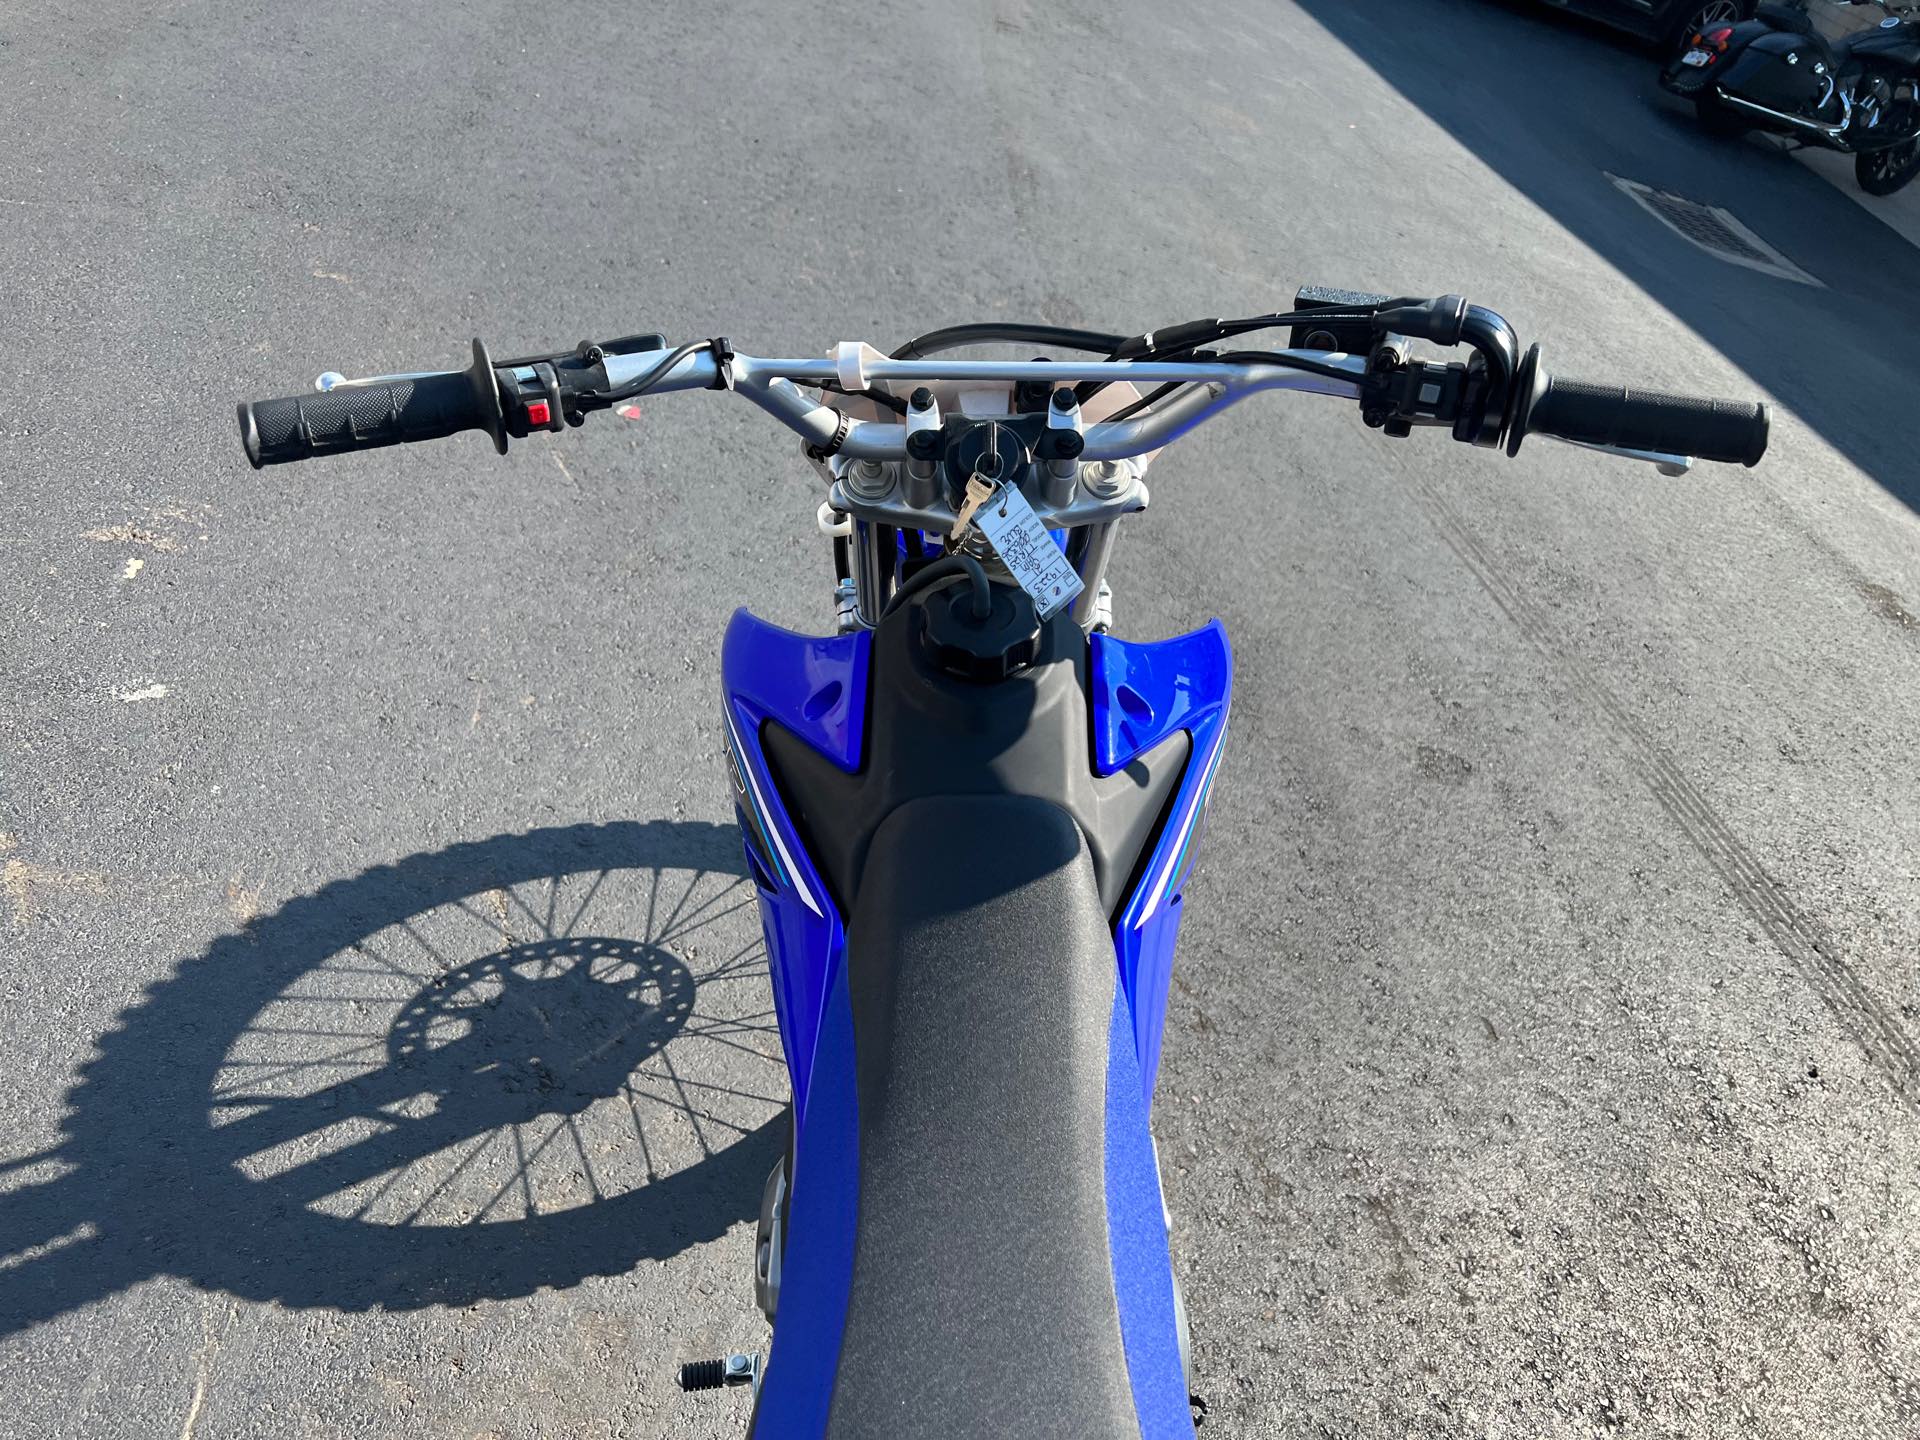 2021 Yamaha TT-R 125LE at Aces Motorcycles - Fort Collins